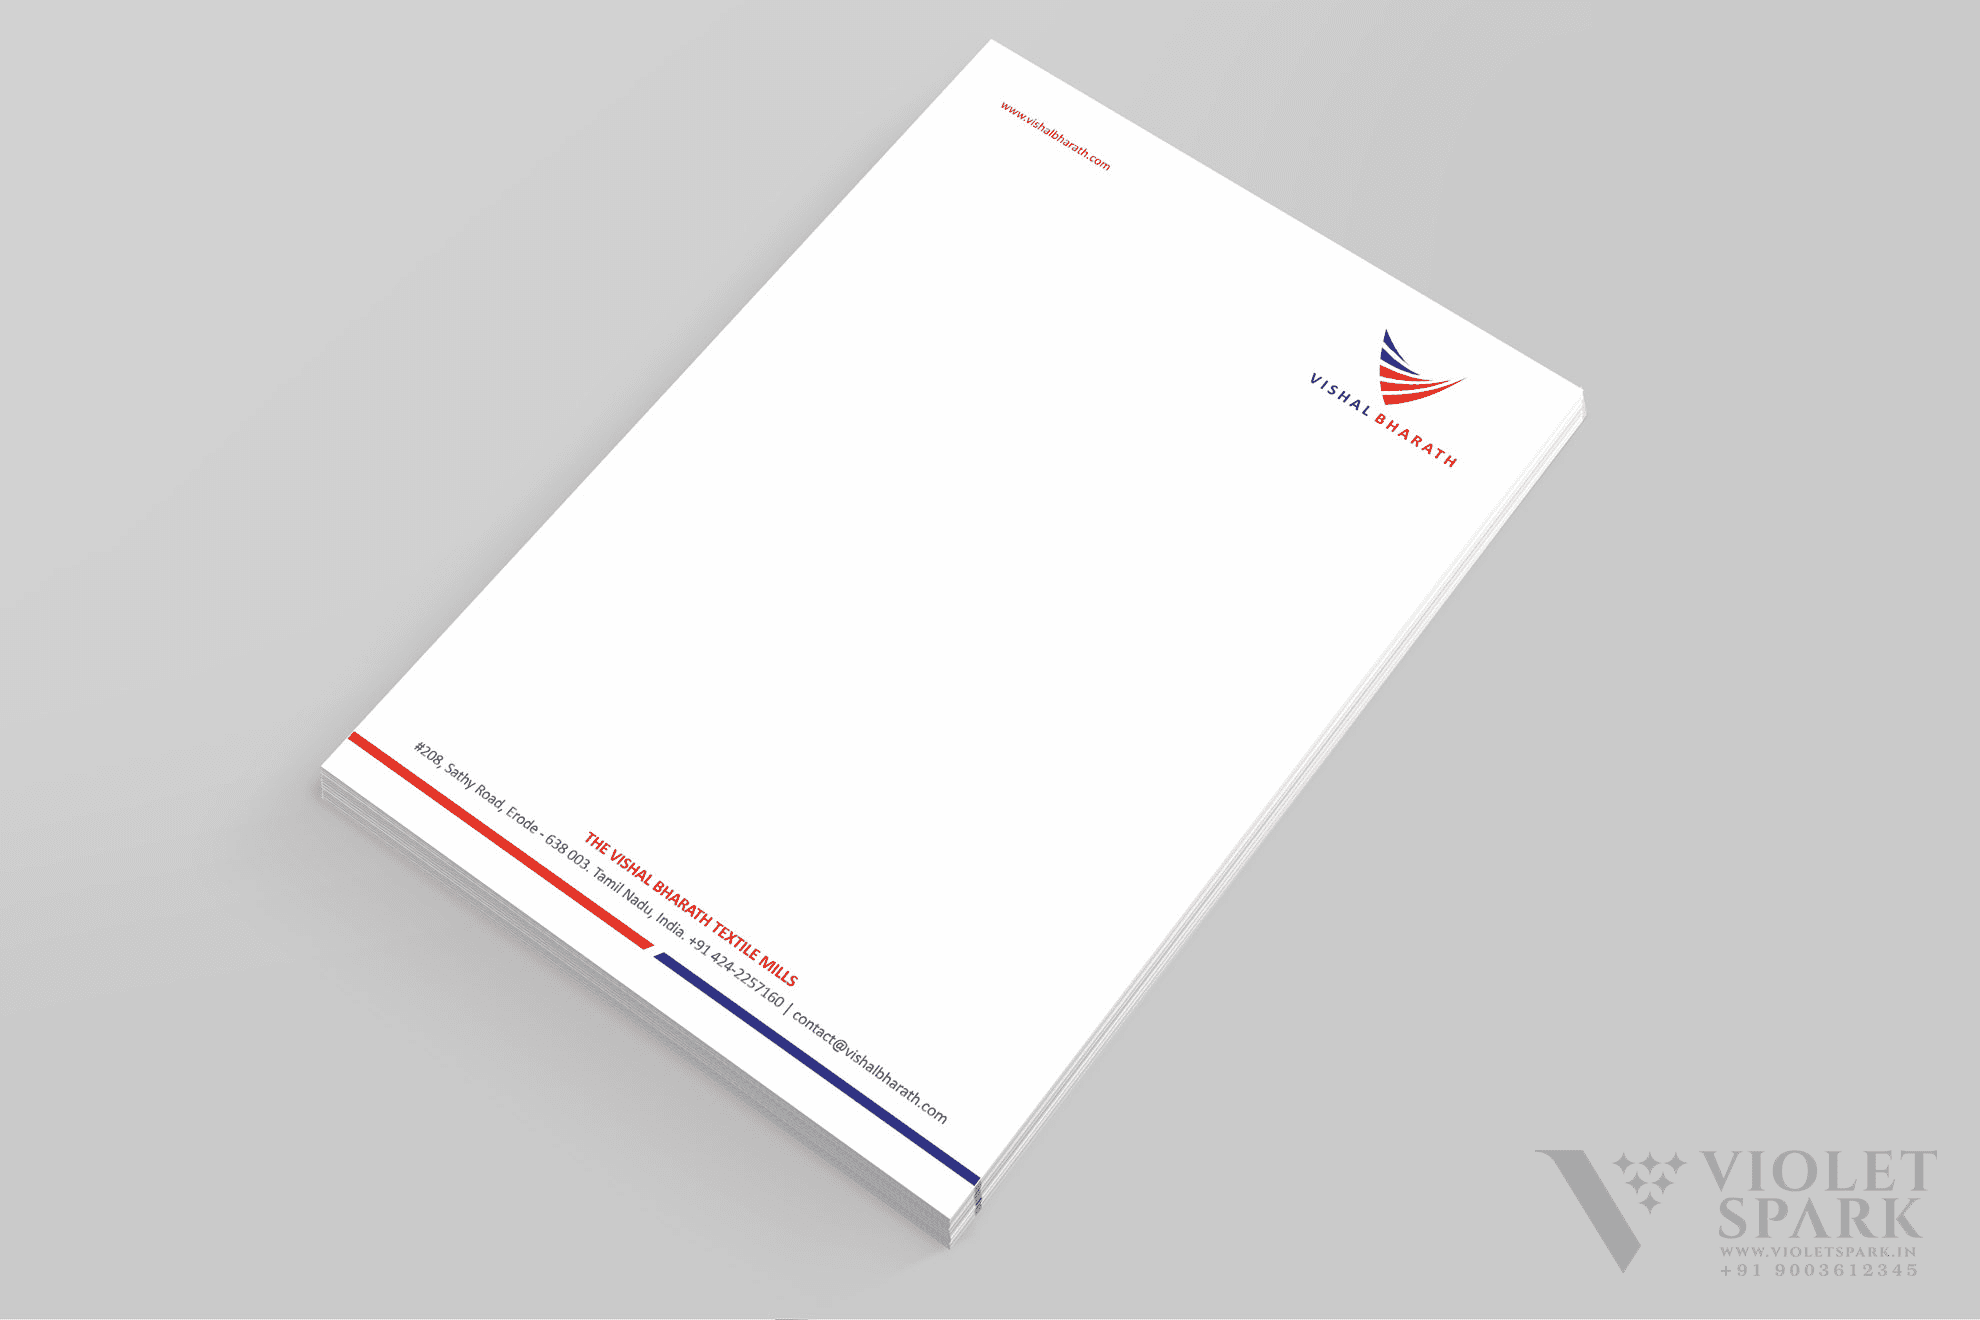 The Vishal Bharath Textile Mills Letter Head Branding & Packaging Design in Coimbatore by Violet Spark